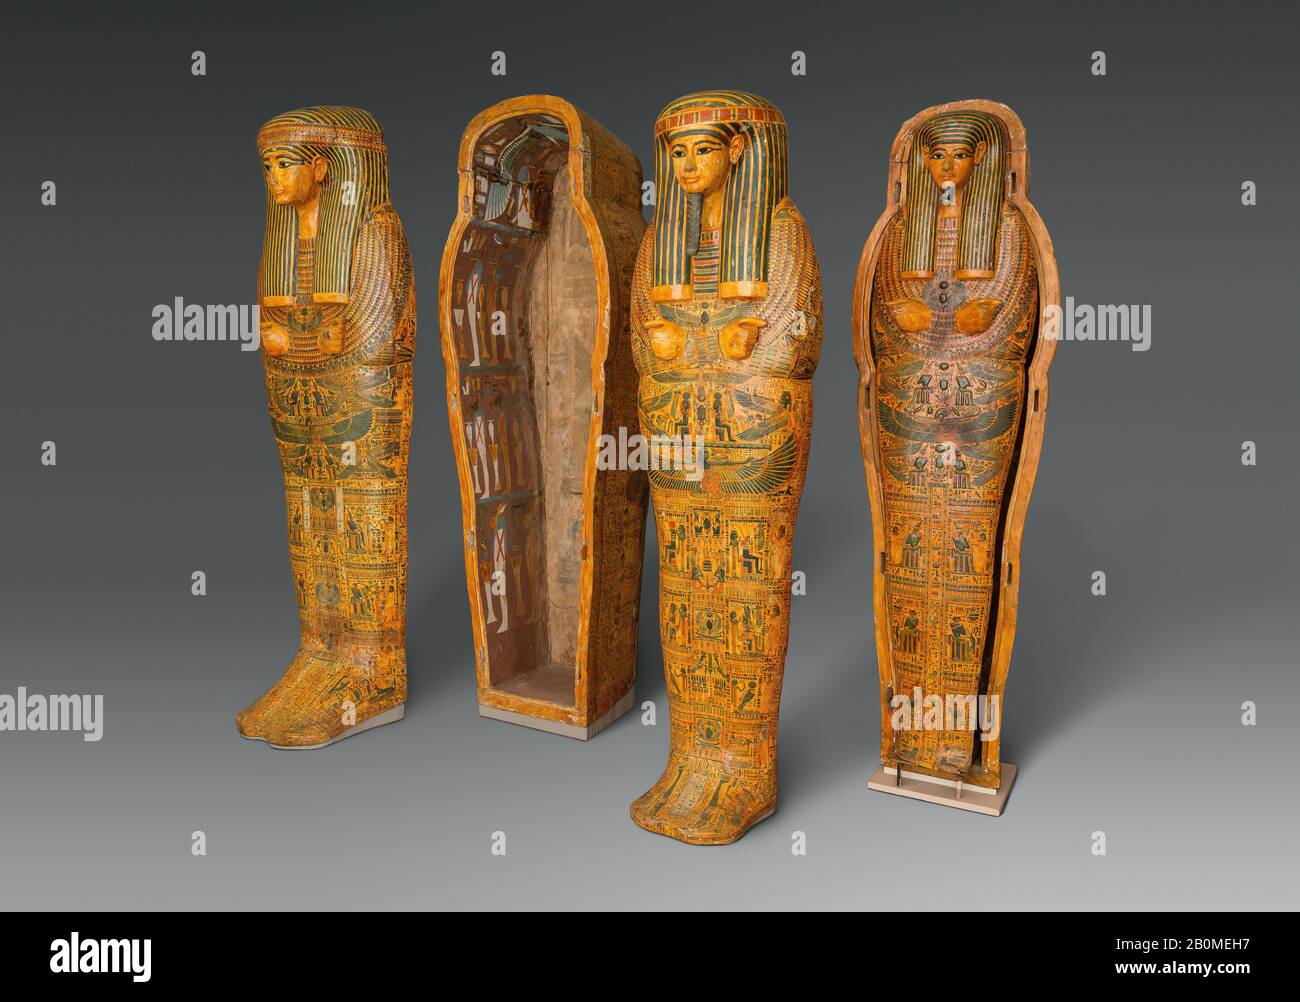 Outer Coffin of Menkheperre (C), usurped from Ahmose, Third Intermediate Period, Dynasty 21, ca. 1000–945 B.C., From Egypt, Upper Egypt, Thebes, Deir el-Bahri, Chamber Burial 3 (Menkheperre), 1922–24, Wood, paint, gesso, H. 205 cm (80 11/16 in); W. 68 cm (26 3/4 in); D. 90 cm (35 7/16 in Stock Photo